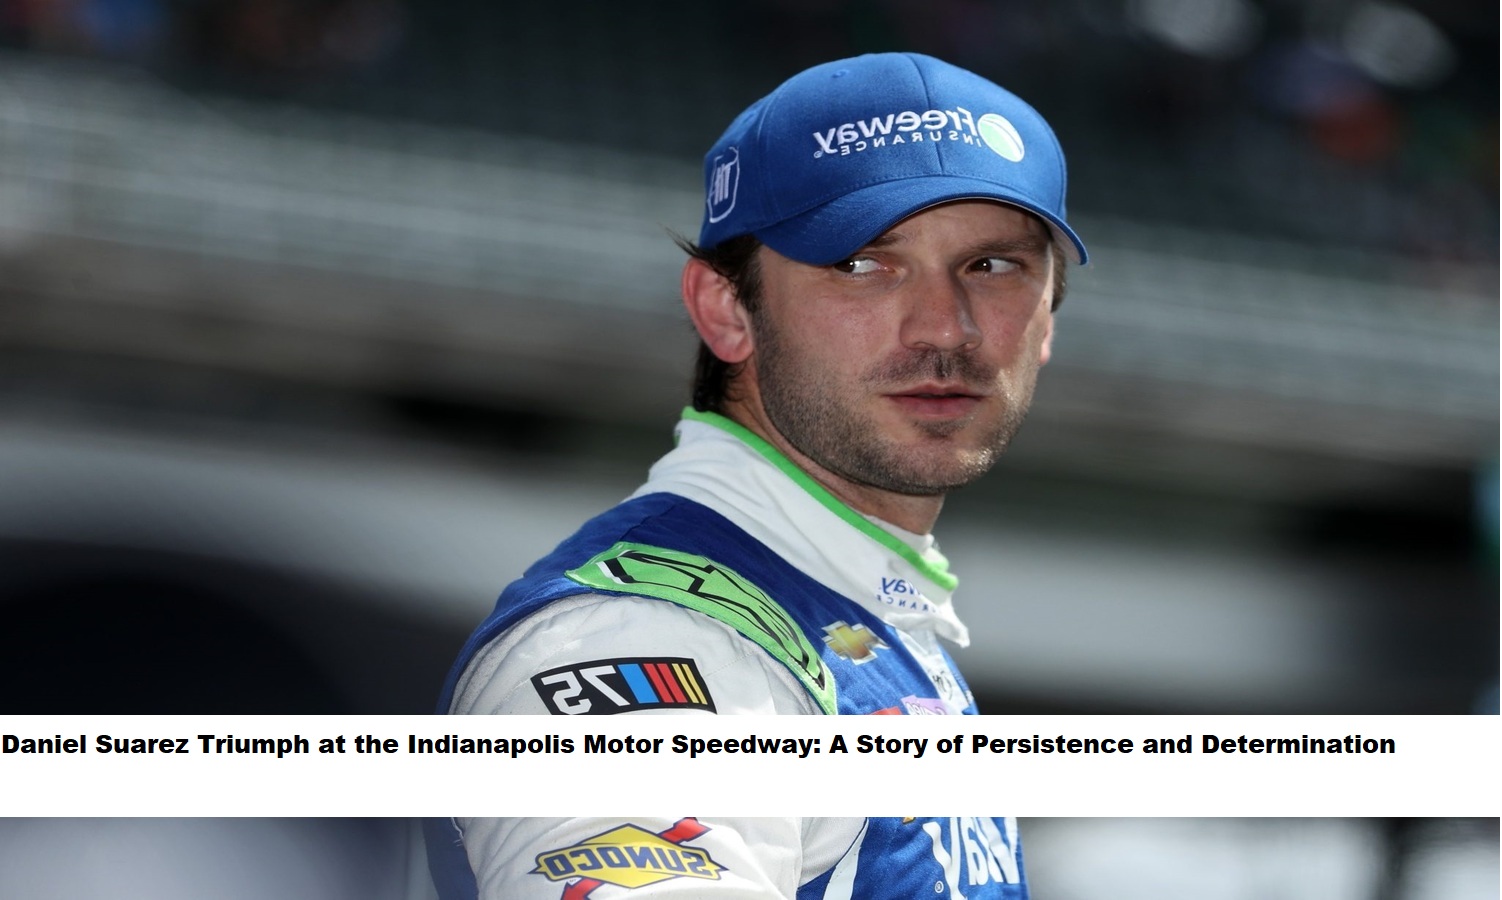 daniel-suarez-triumph-at-the-indianapolis-motor-speedway-a-story-of-persistence-and-determination